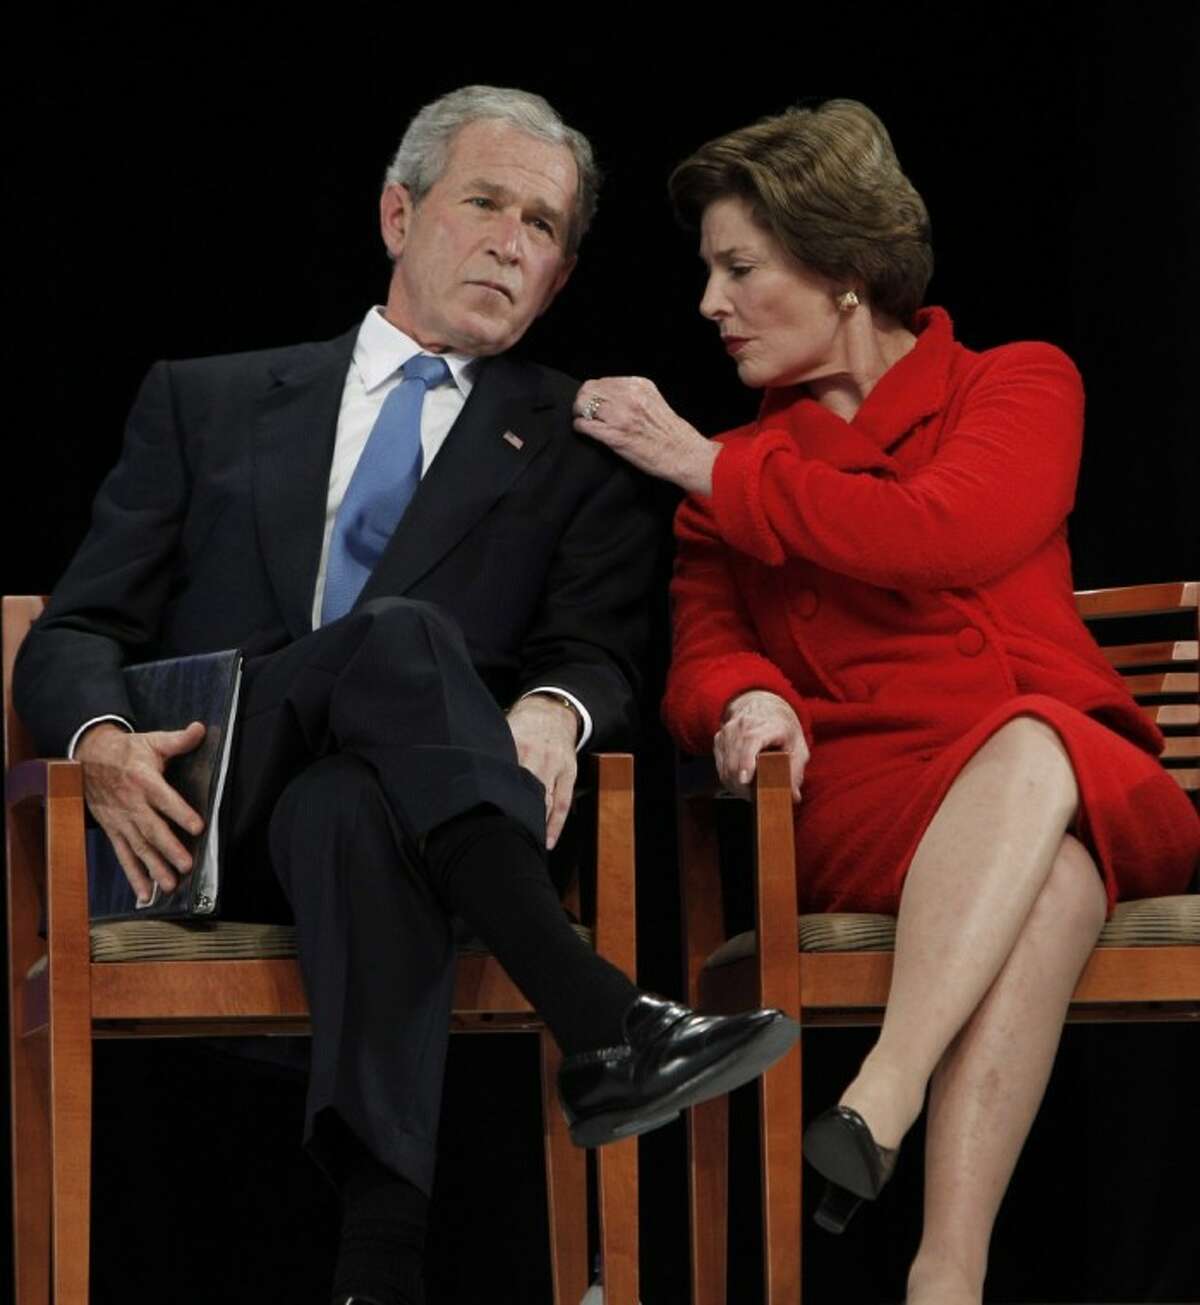 Laura Bush and former President George W. Bush attend the groundbreaking ceremony for the President George W. Bush Presidential Center at SMU in Dallas Tuesday.